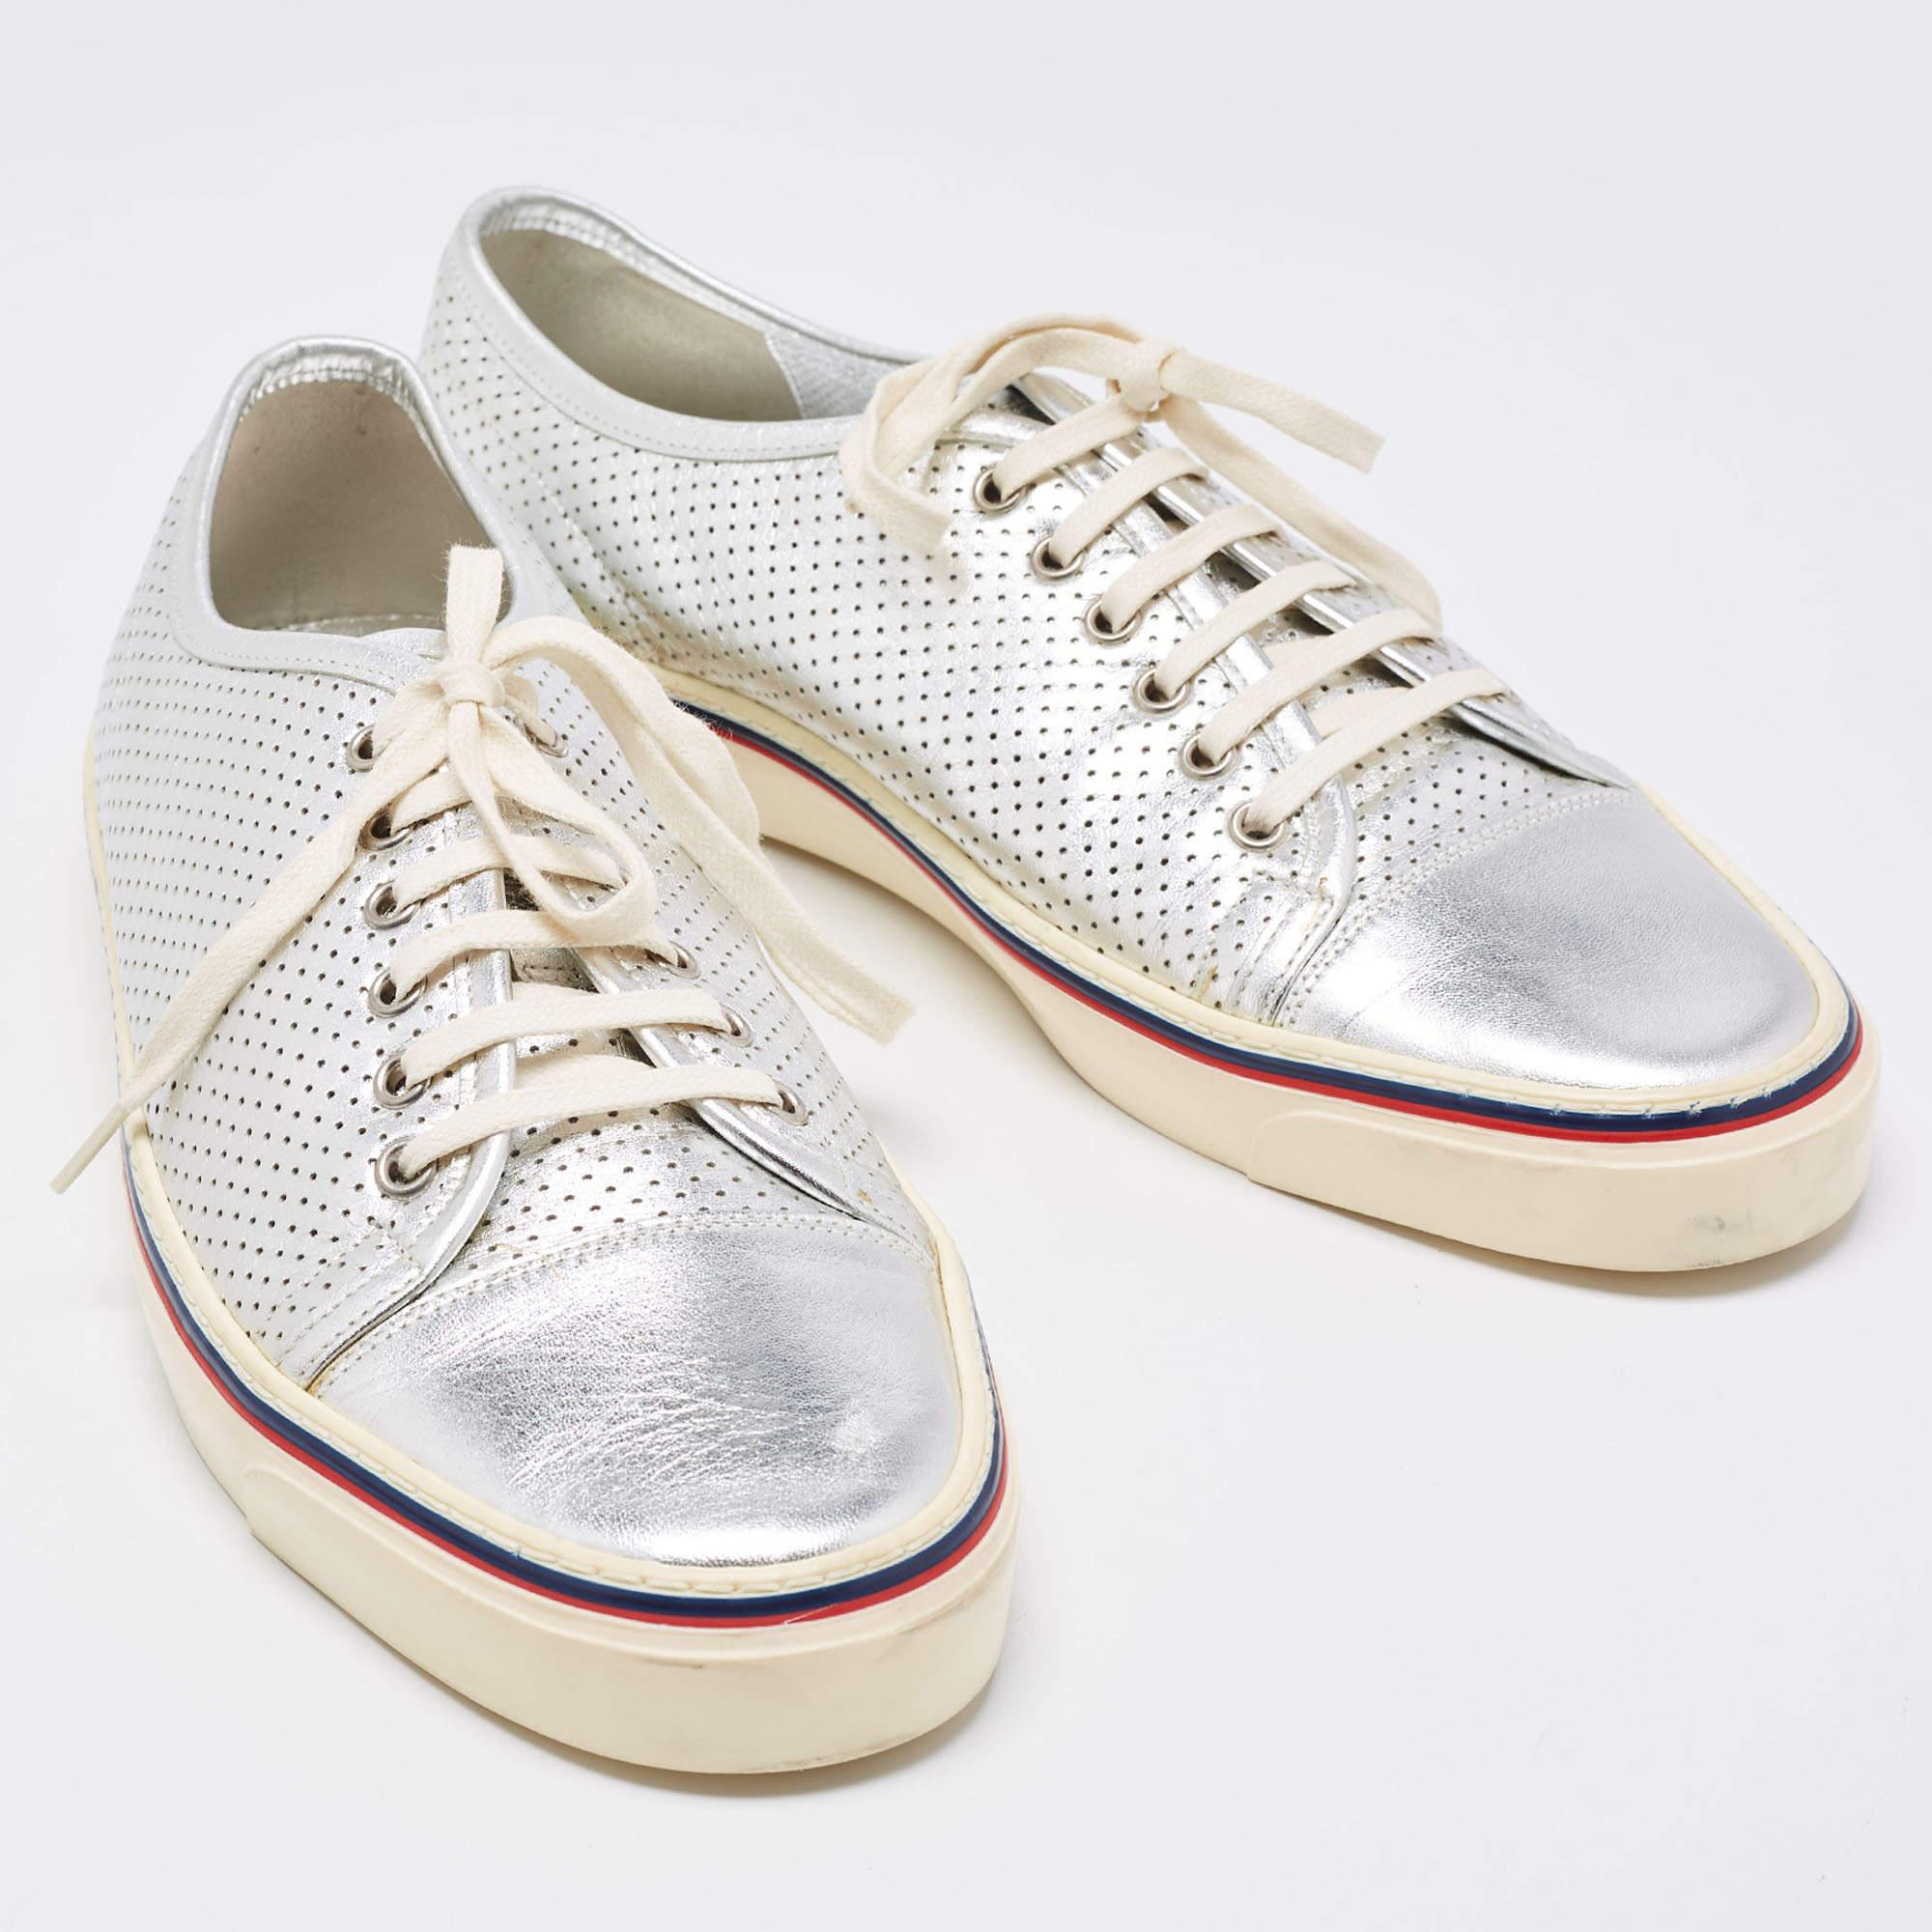 Gucci Silver Perforated Leather Low Top Sneakers Size 44.5 In Excellent Condition For Sale In Dubai, Al Qouz 2